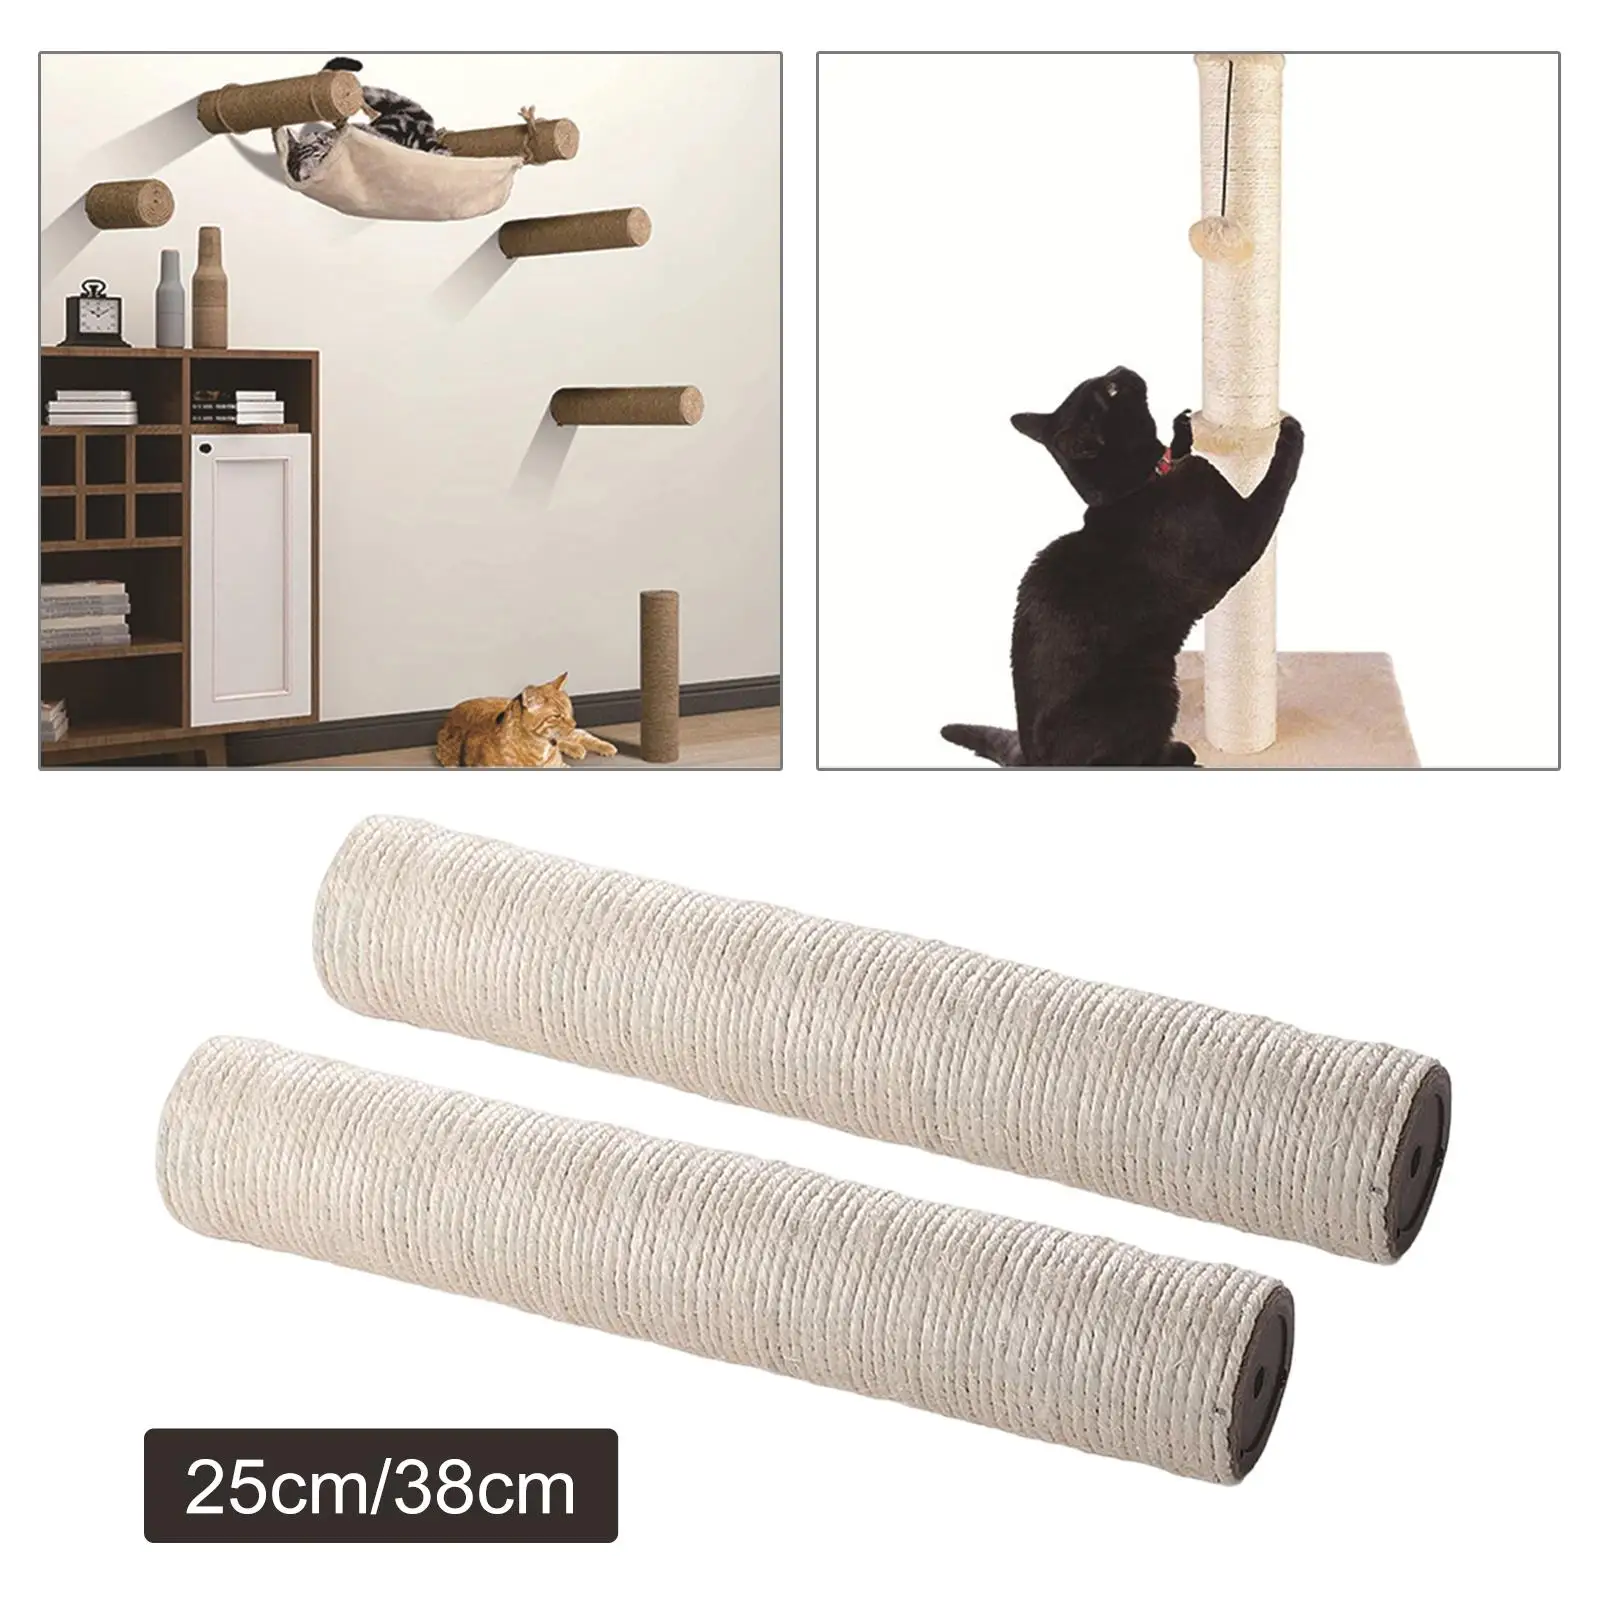 Cotton Rope Scratching Post Replacement Parts Dia 2.75in for Pet Cats